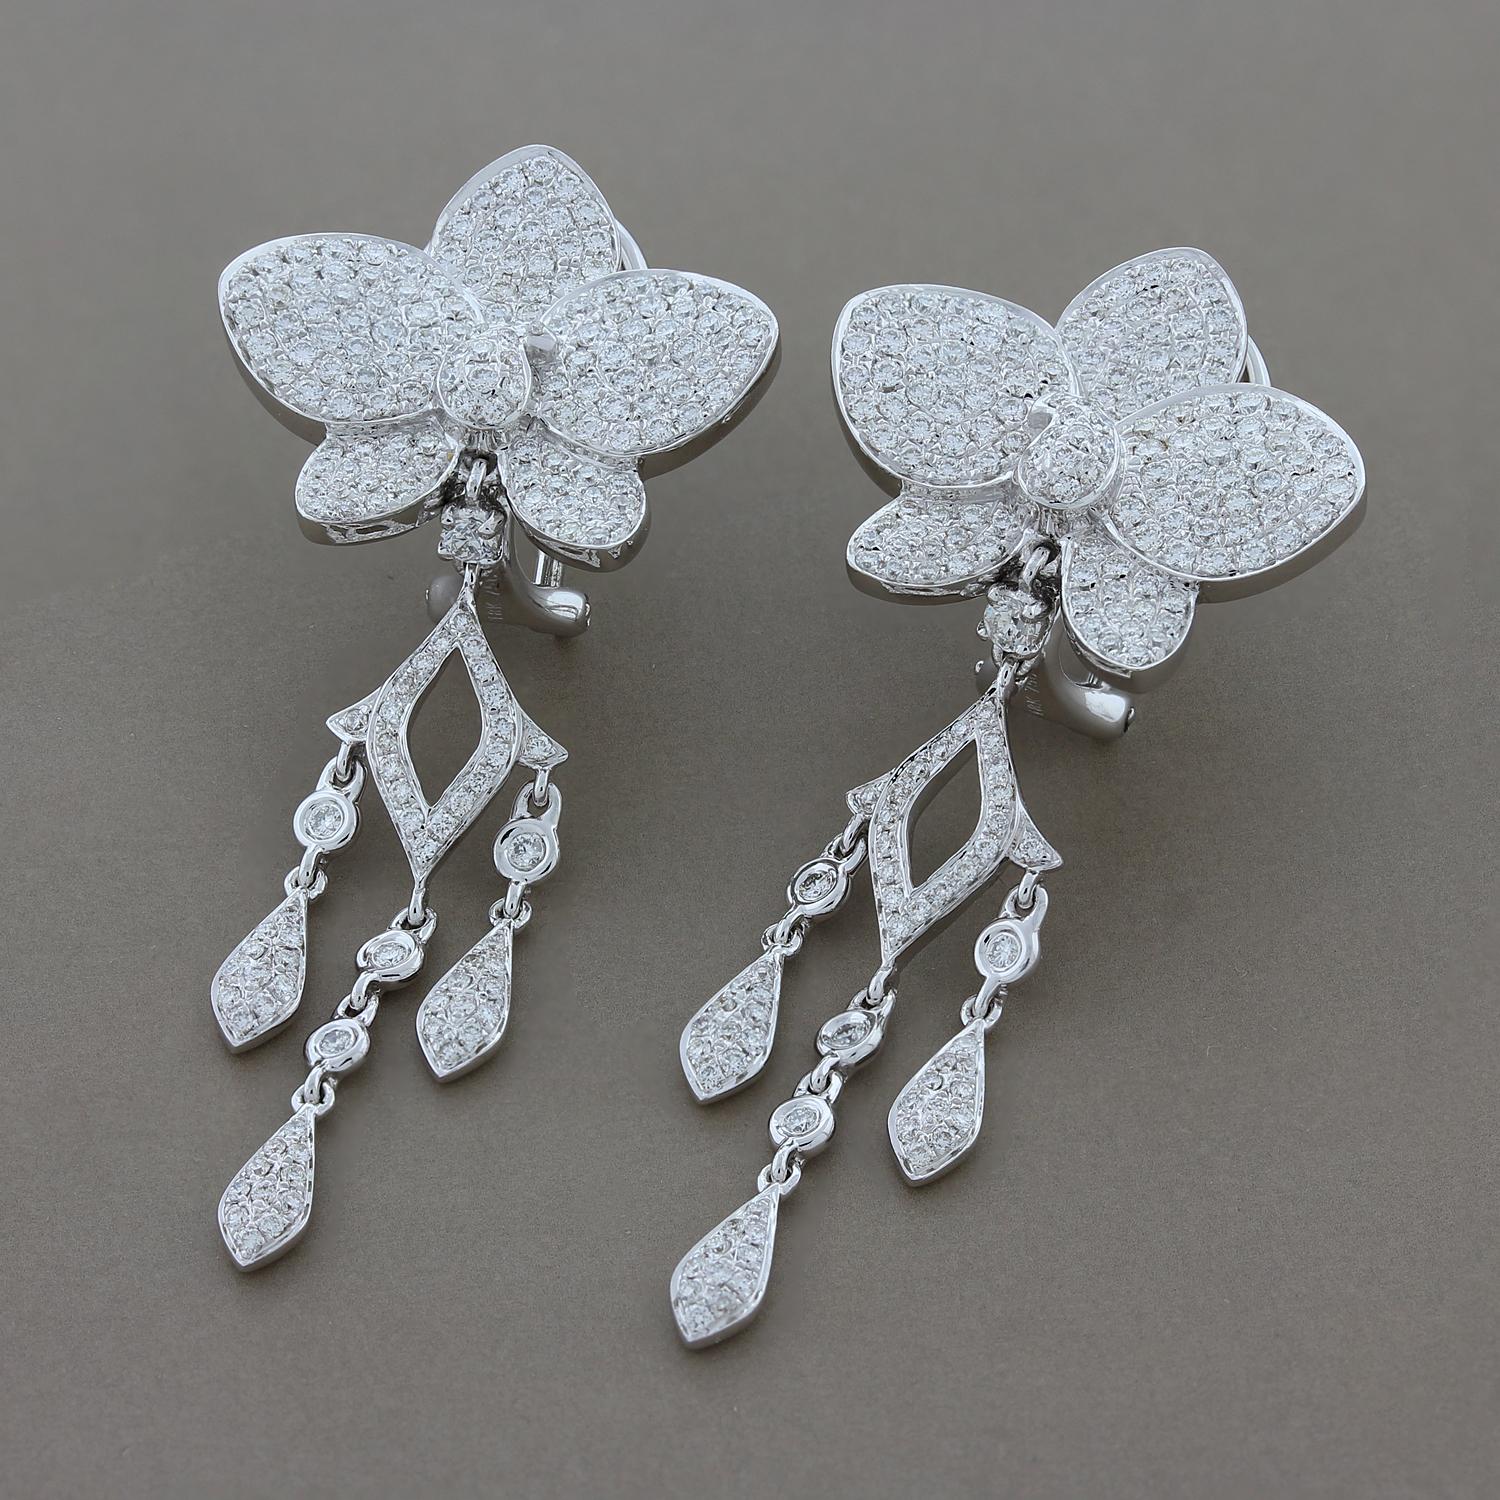 This pair of earrings features 2.40 carats of pave set round cut diamonds in an 18K white gold setting. The white diamonds are top VS quality with amazing shine. The flower and chandelier drop make this a feminine and fun pair of earrings to dance